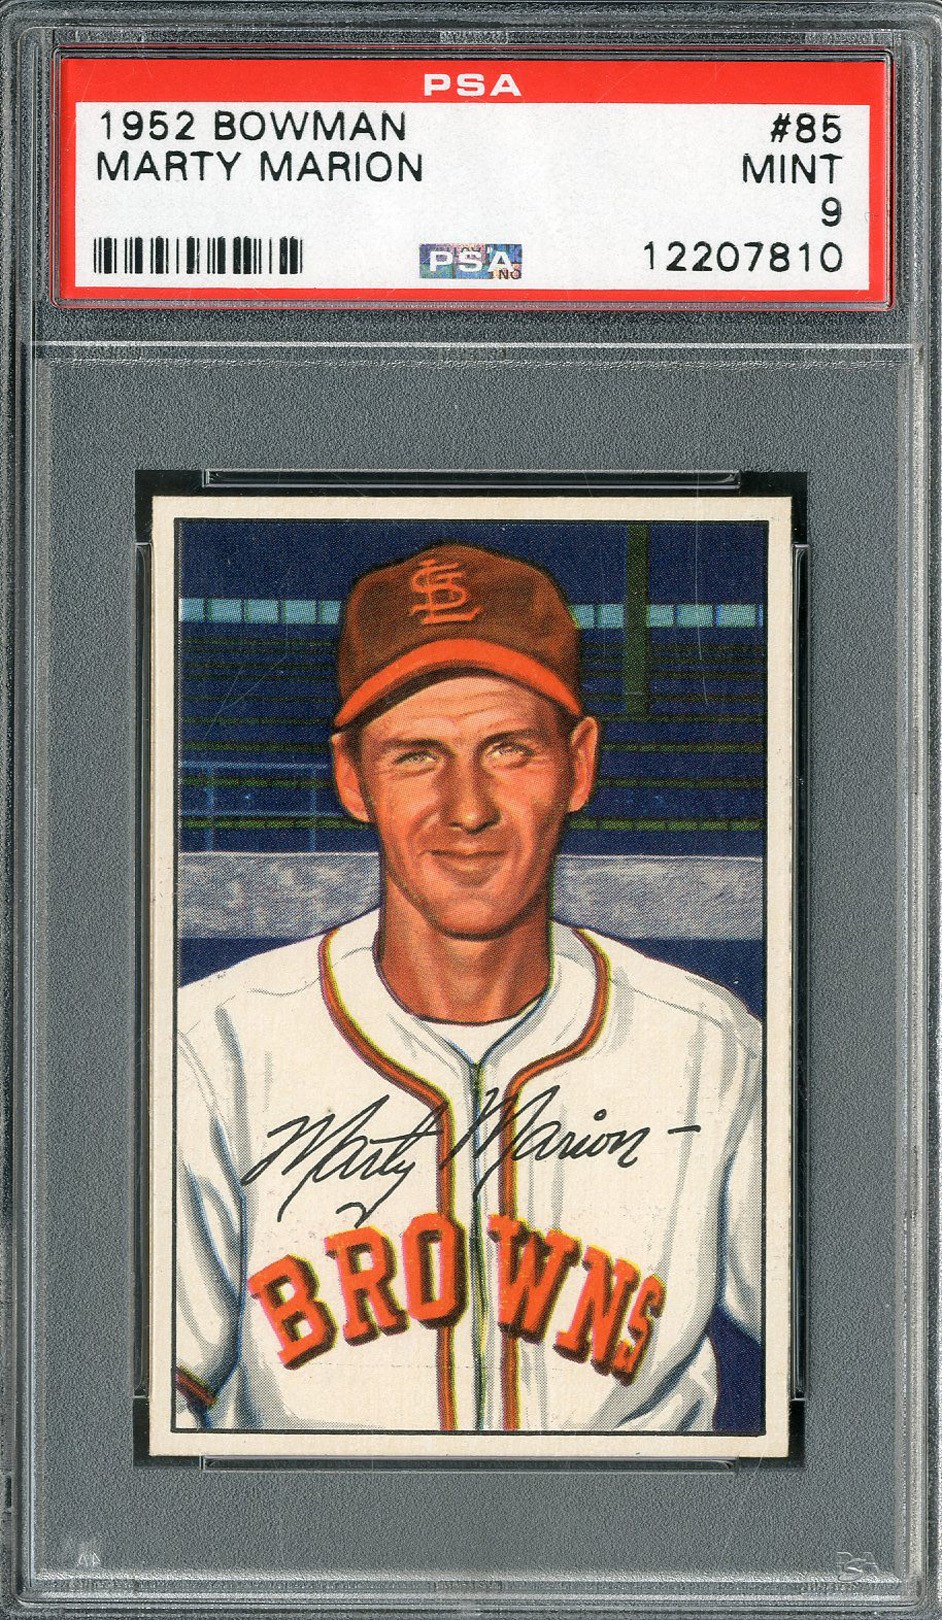 Baseball and Trading Cards - 1952 Bowman #85 Marty Marion PSA MINT 9